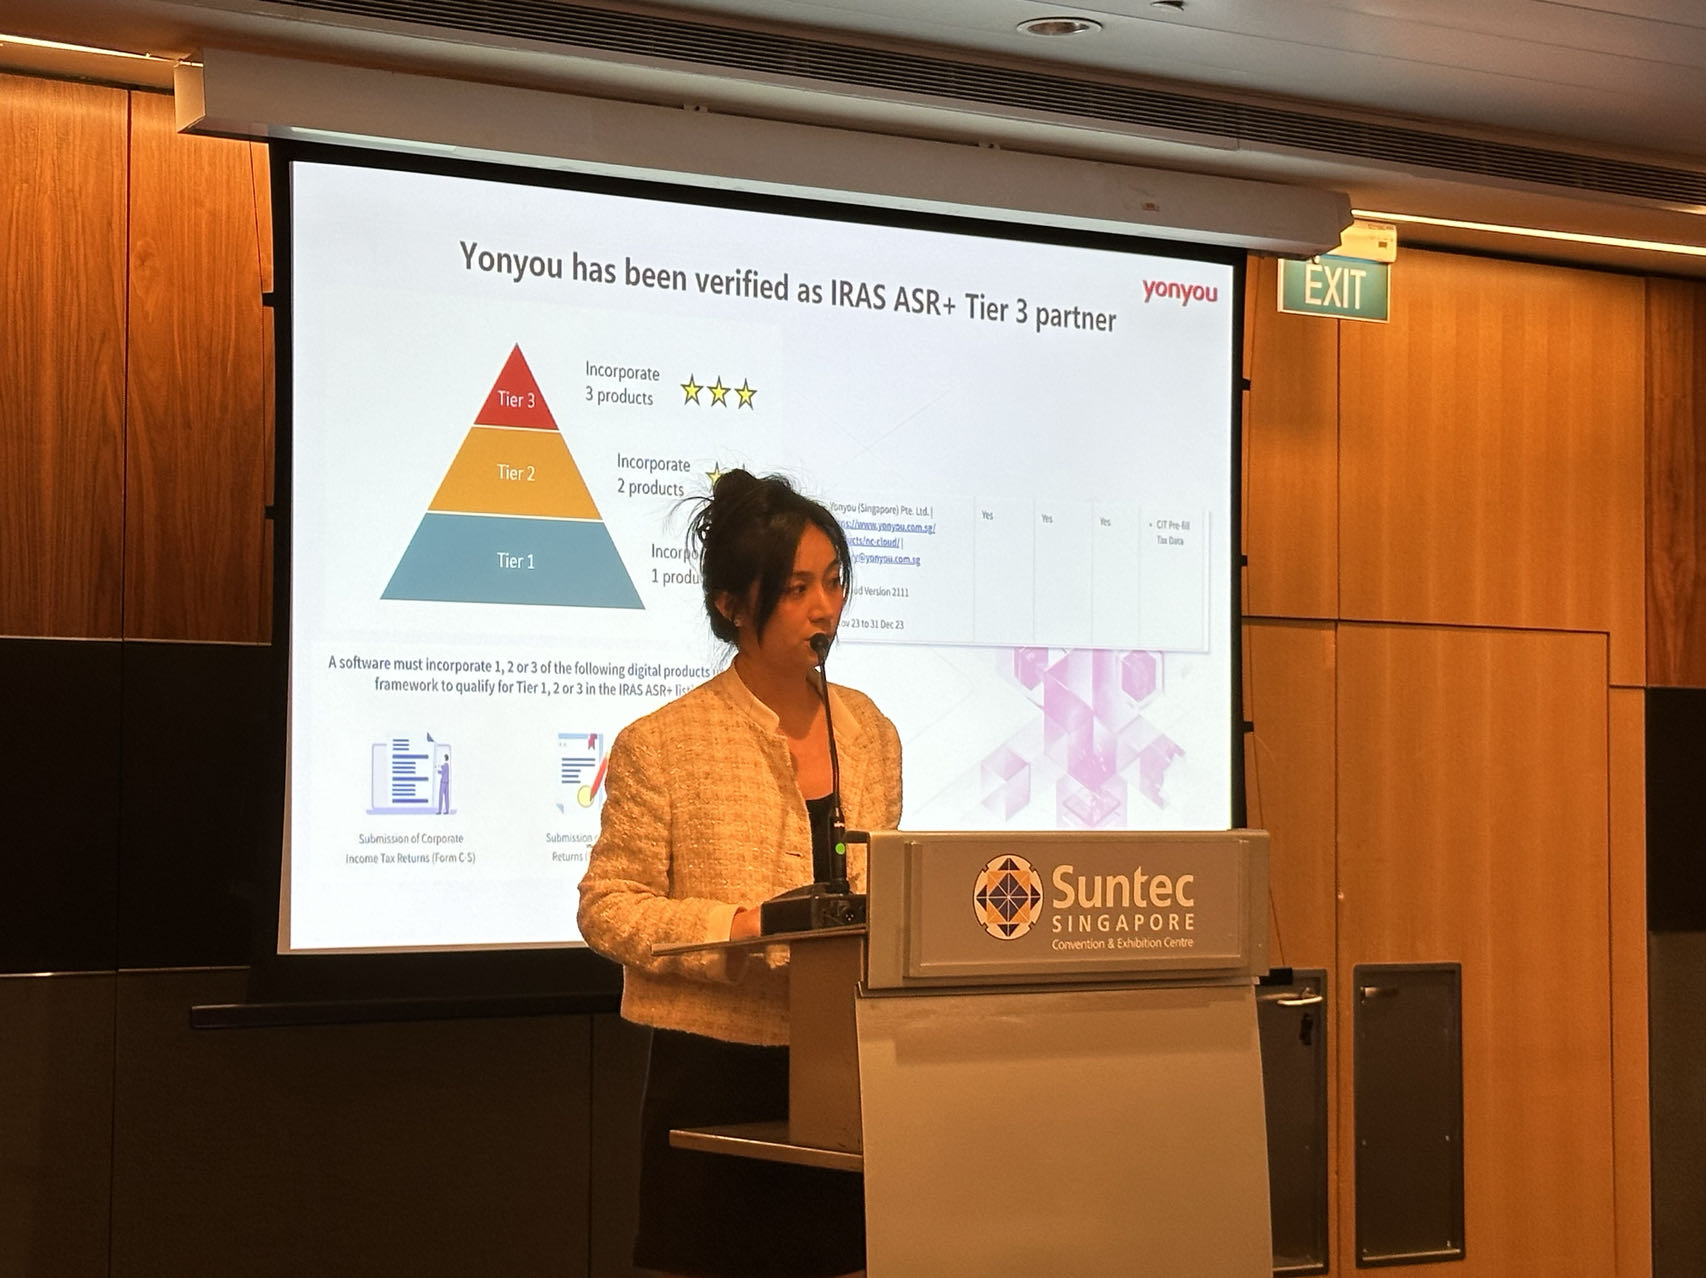 Youhuhui 友户会: Yonyou’s Annual Customer Appreciation Day, showcasing new technologies with partners from OCBC Bank & Staple AI